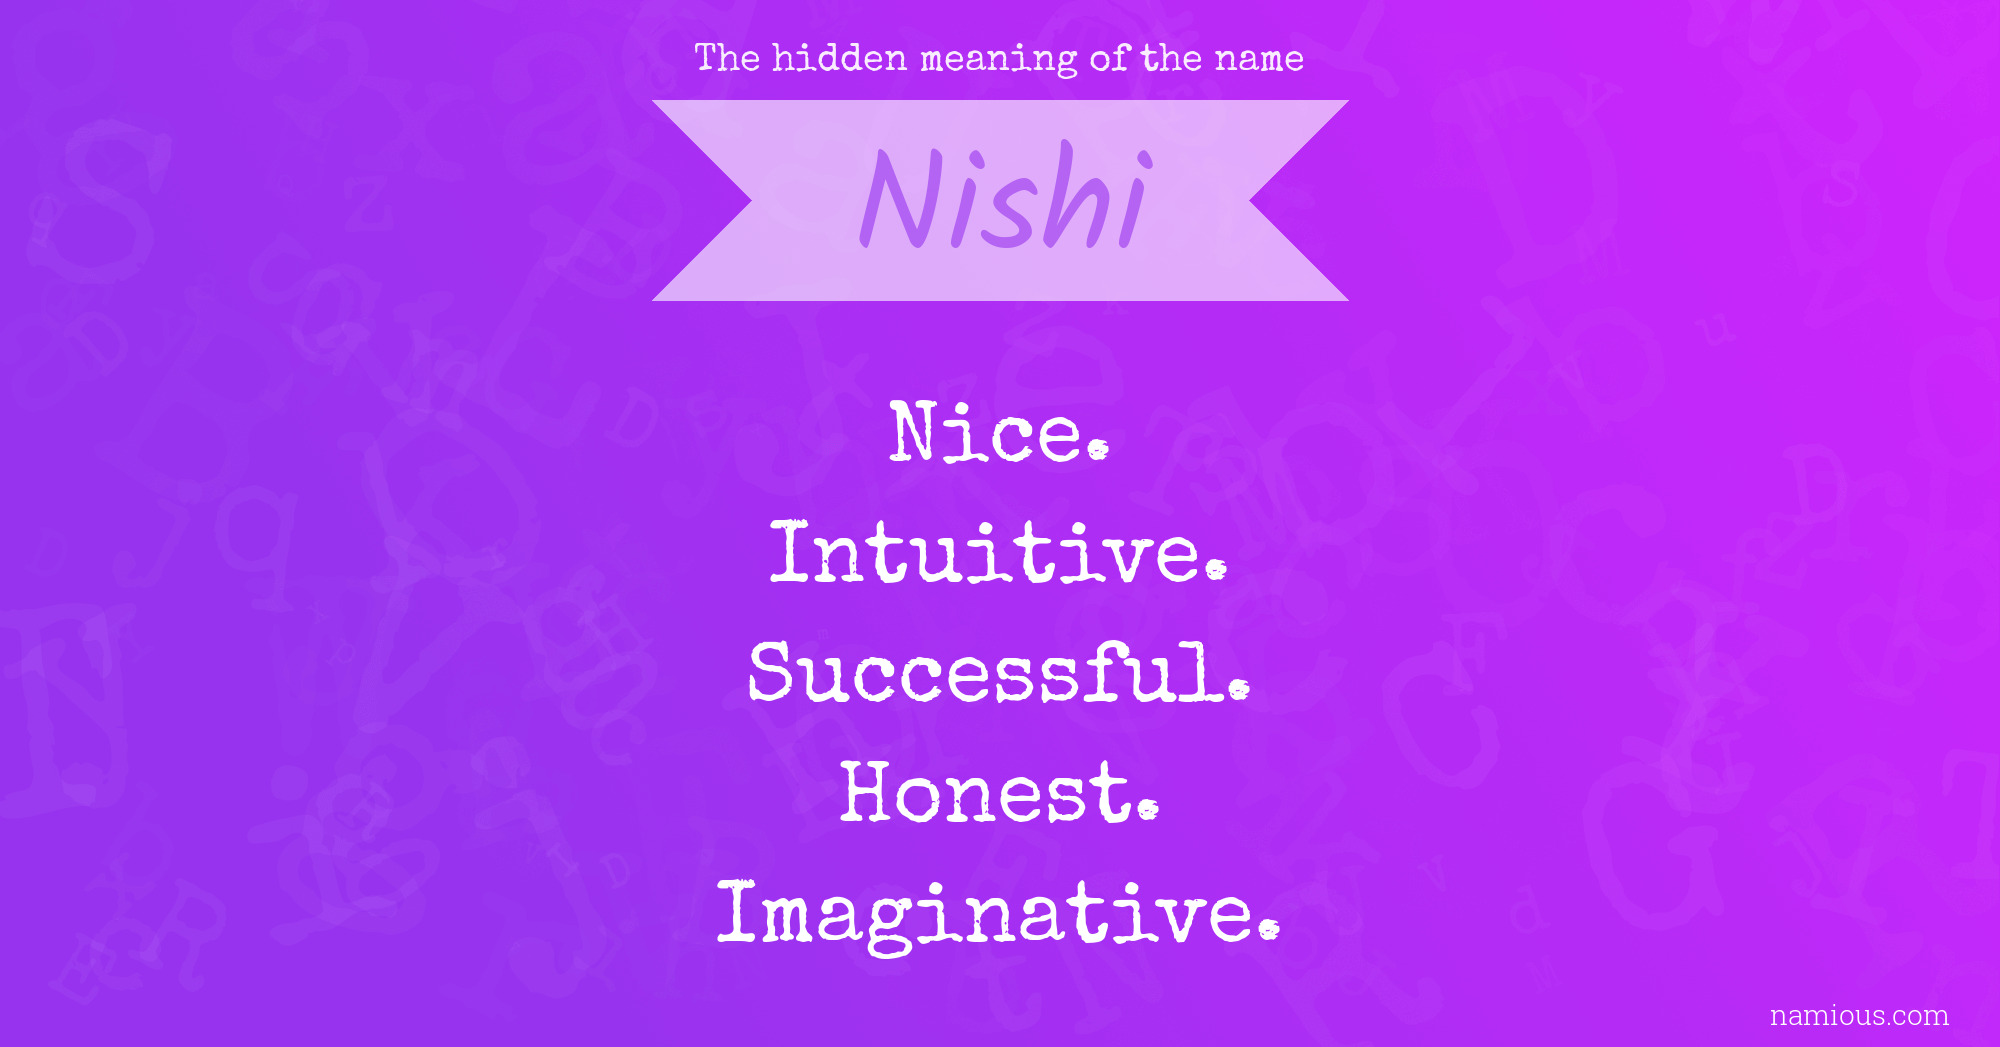 The hidden meaning of the name Nishi